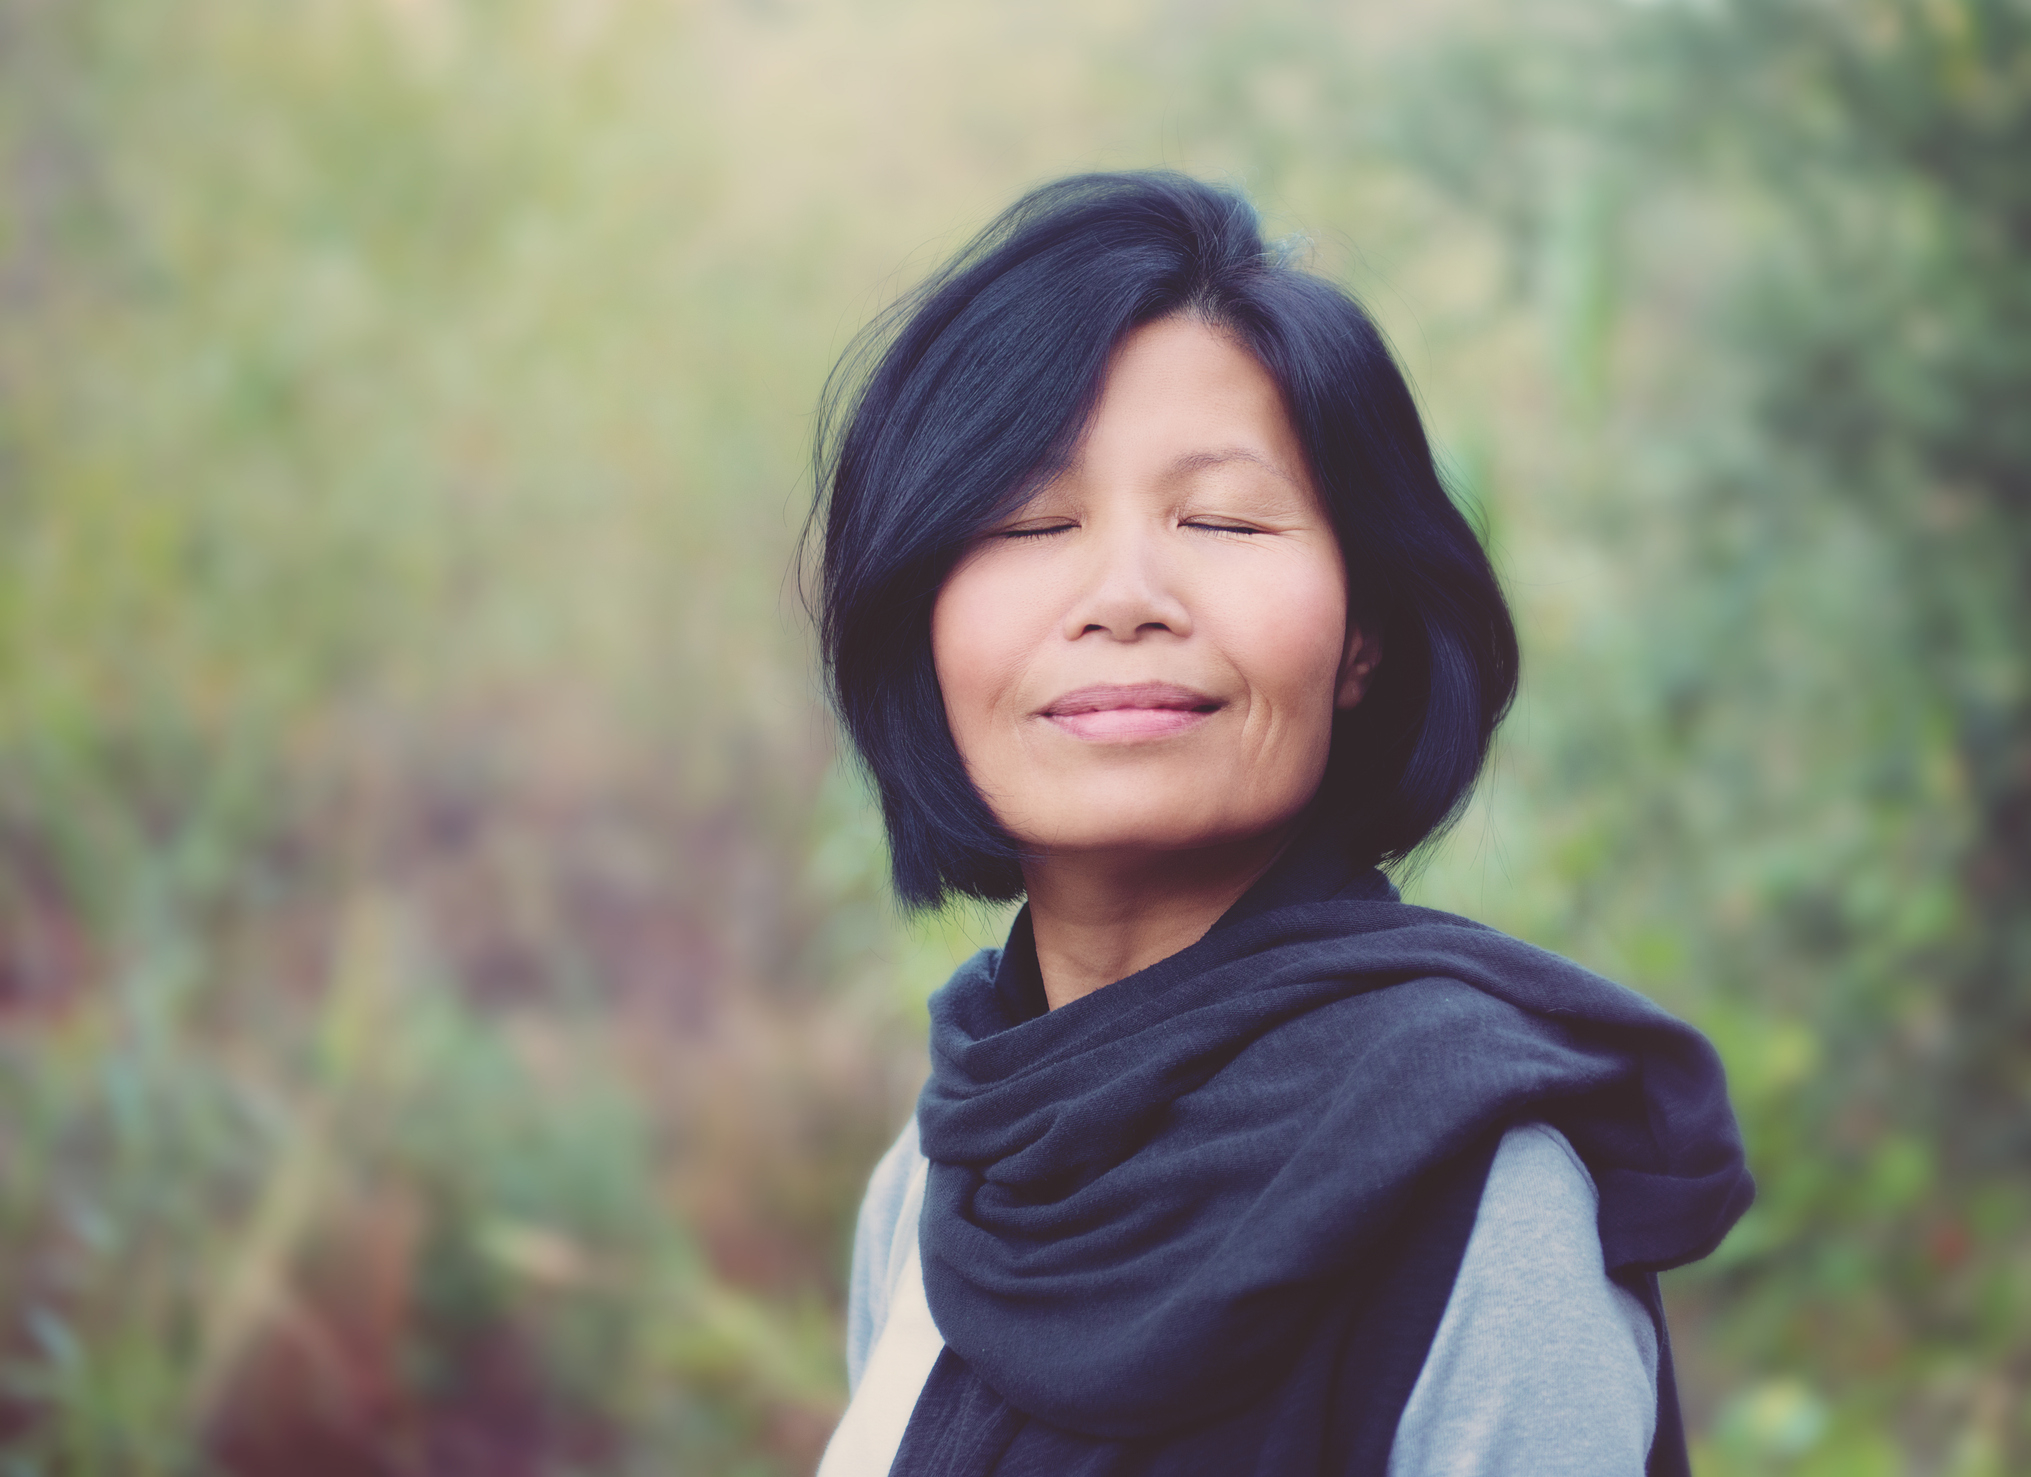 Woman with a serene expression wearing a scarf outdoors